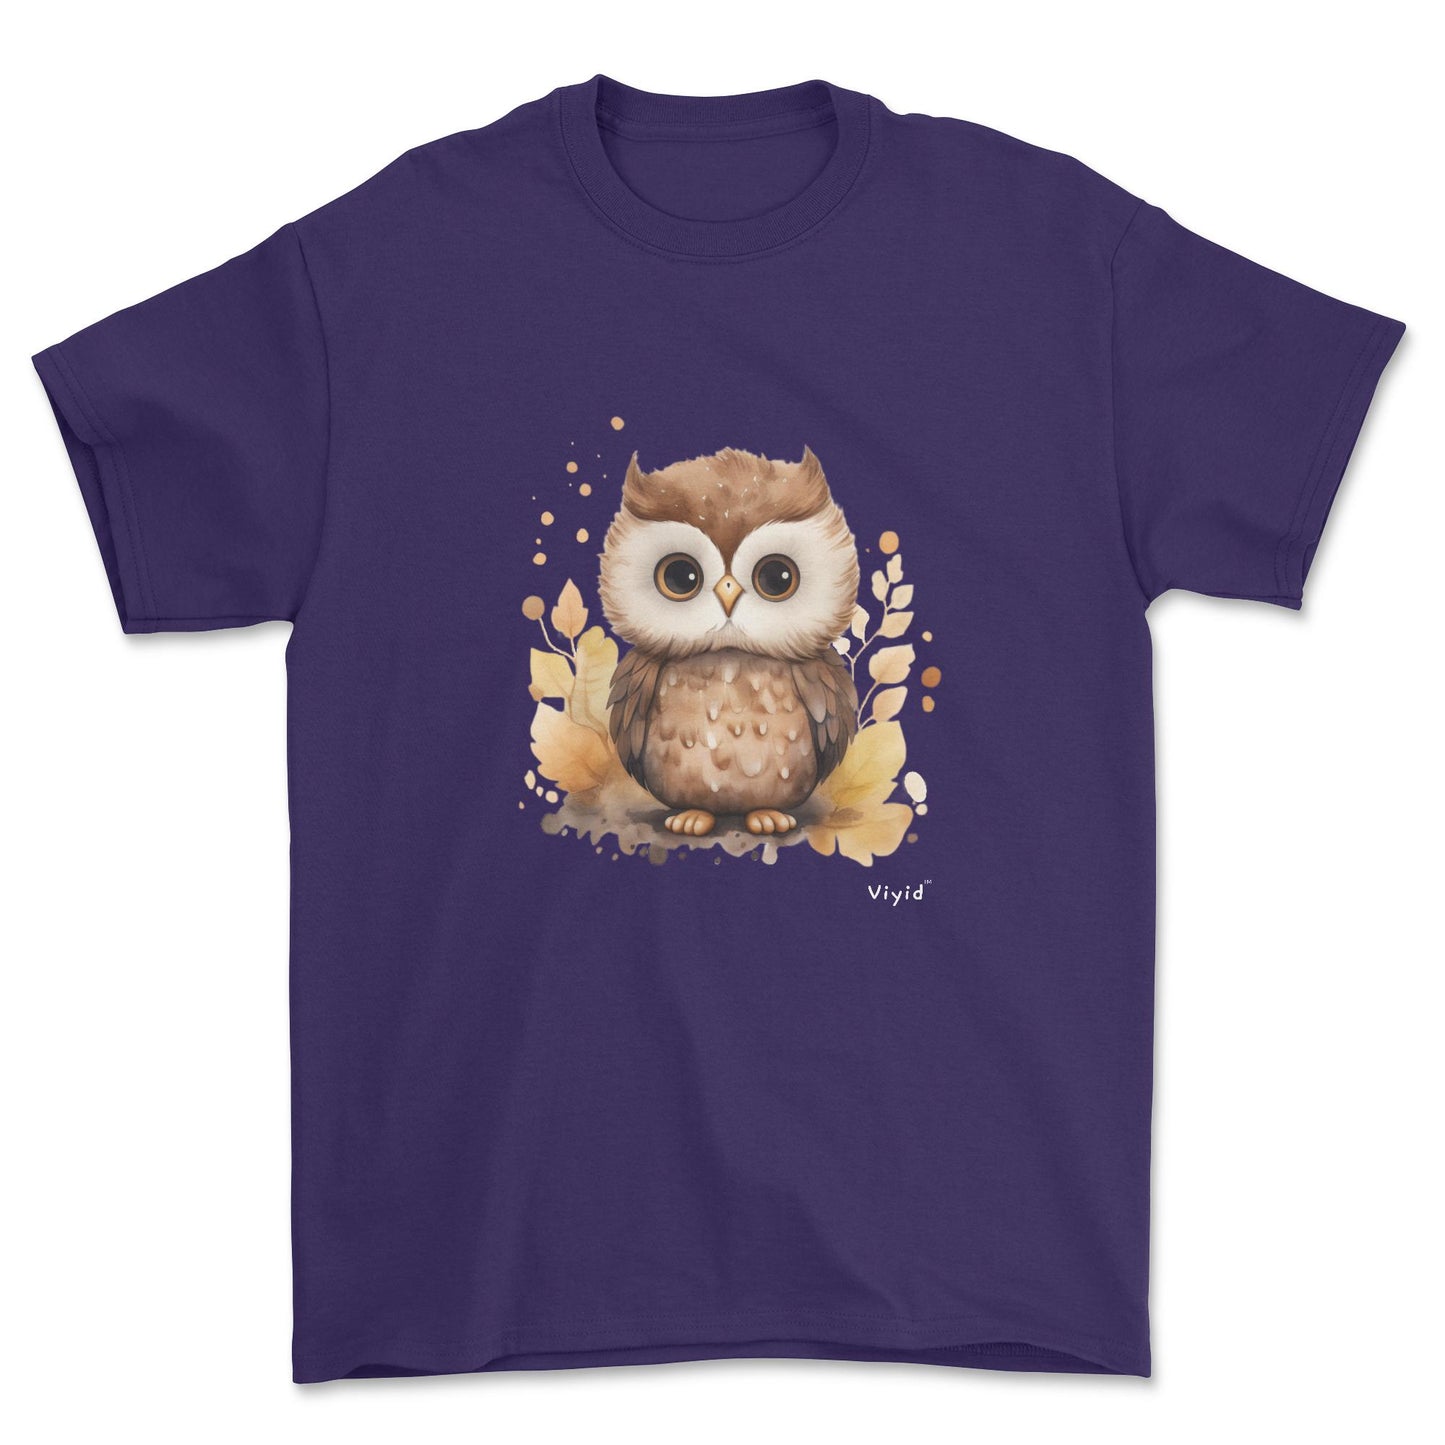 nocturnal owl youth t-shirt purple